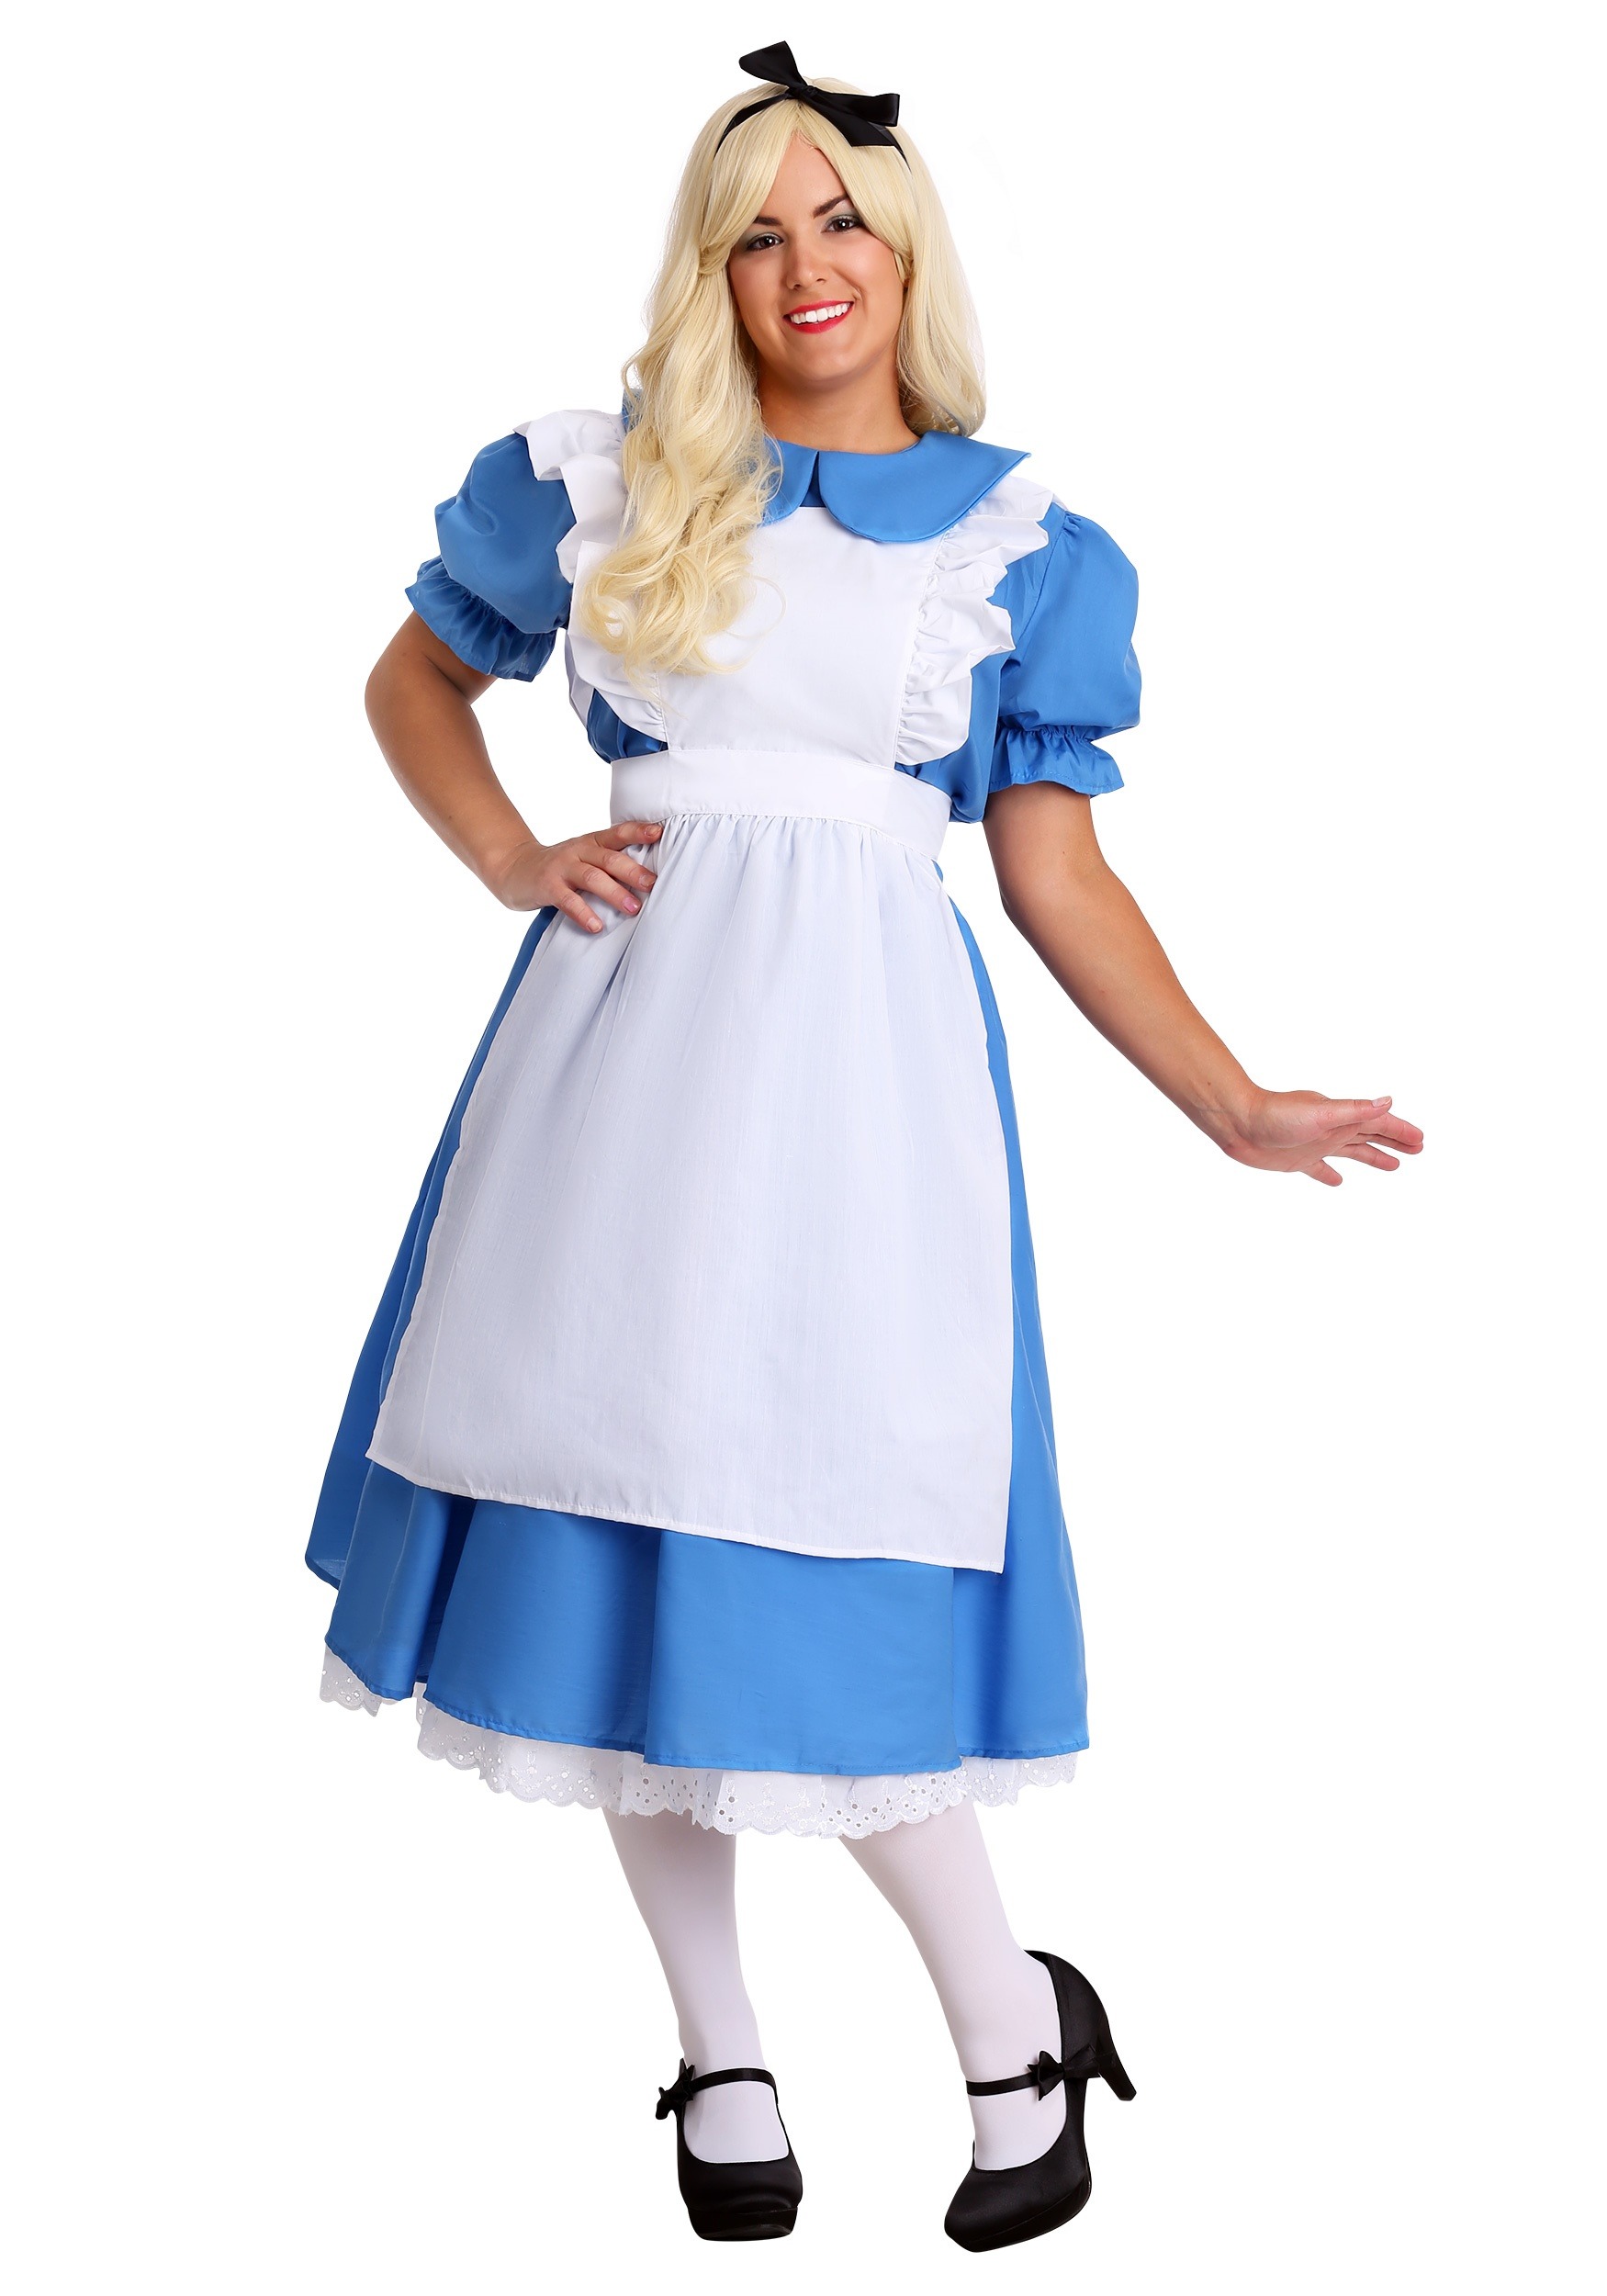 Photos - Fancy Dress Deluxe FUN Costumes  Plus Size Alice Costume for Women | Exclusive Alice Co 